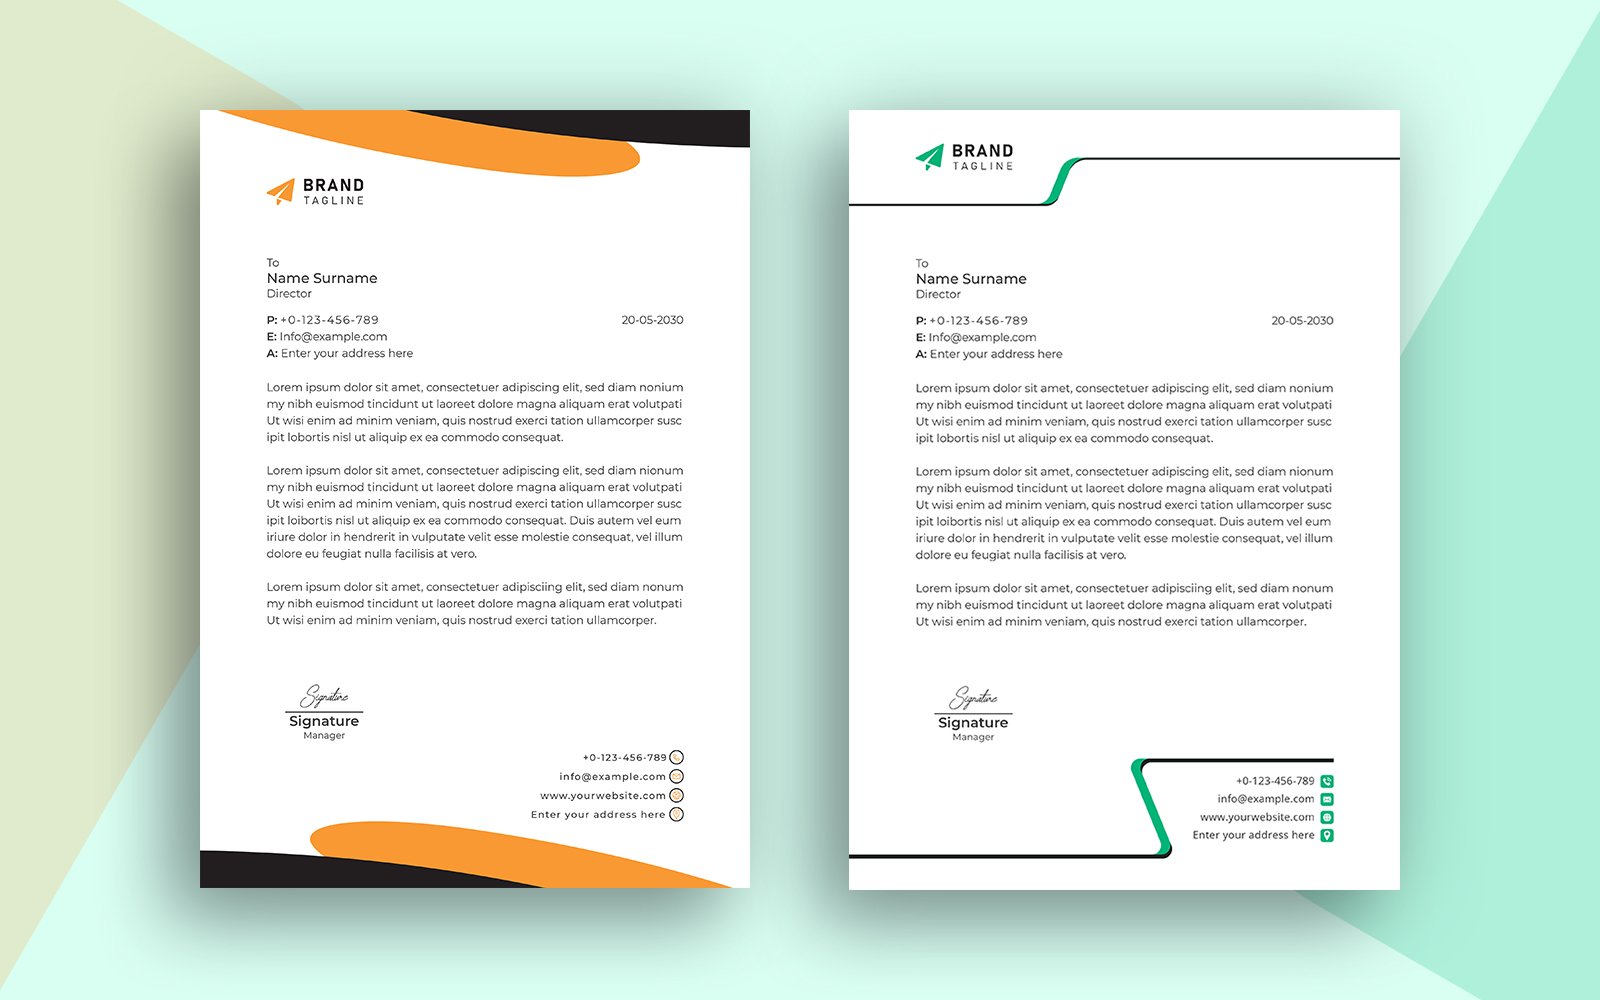 Template #247022 Company Document Webdesign Template - Logo template Preview